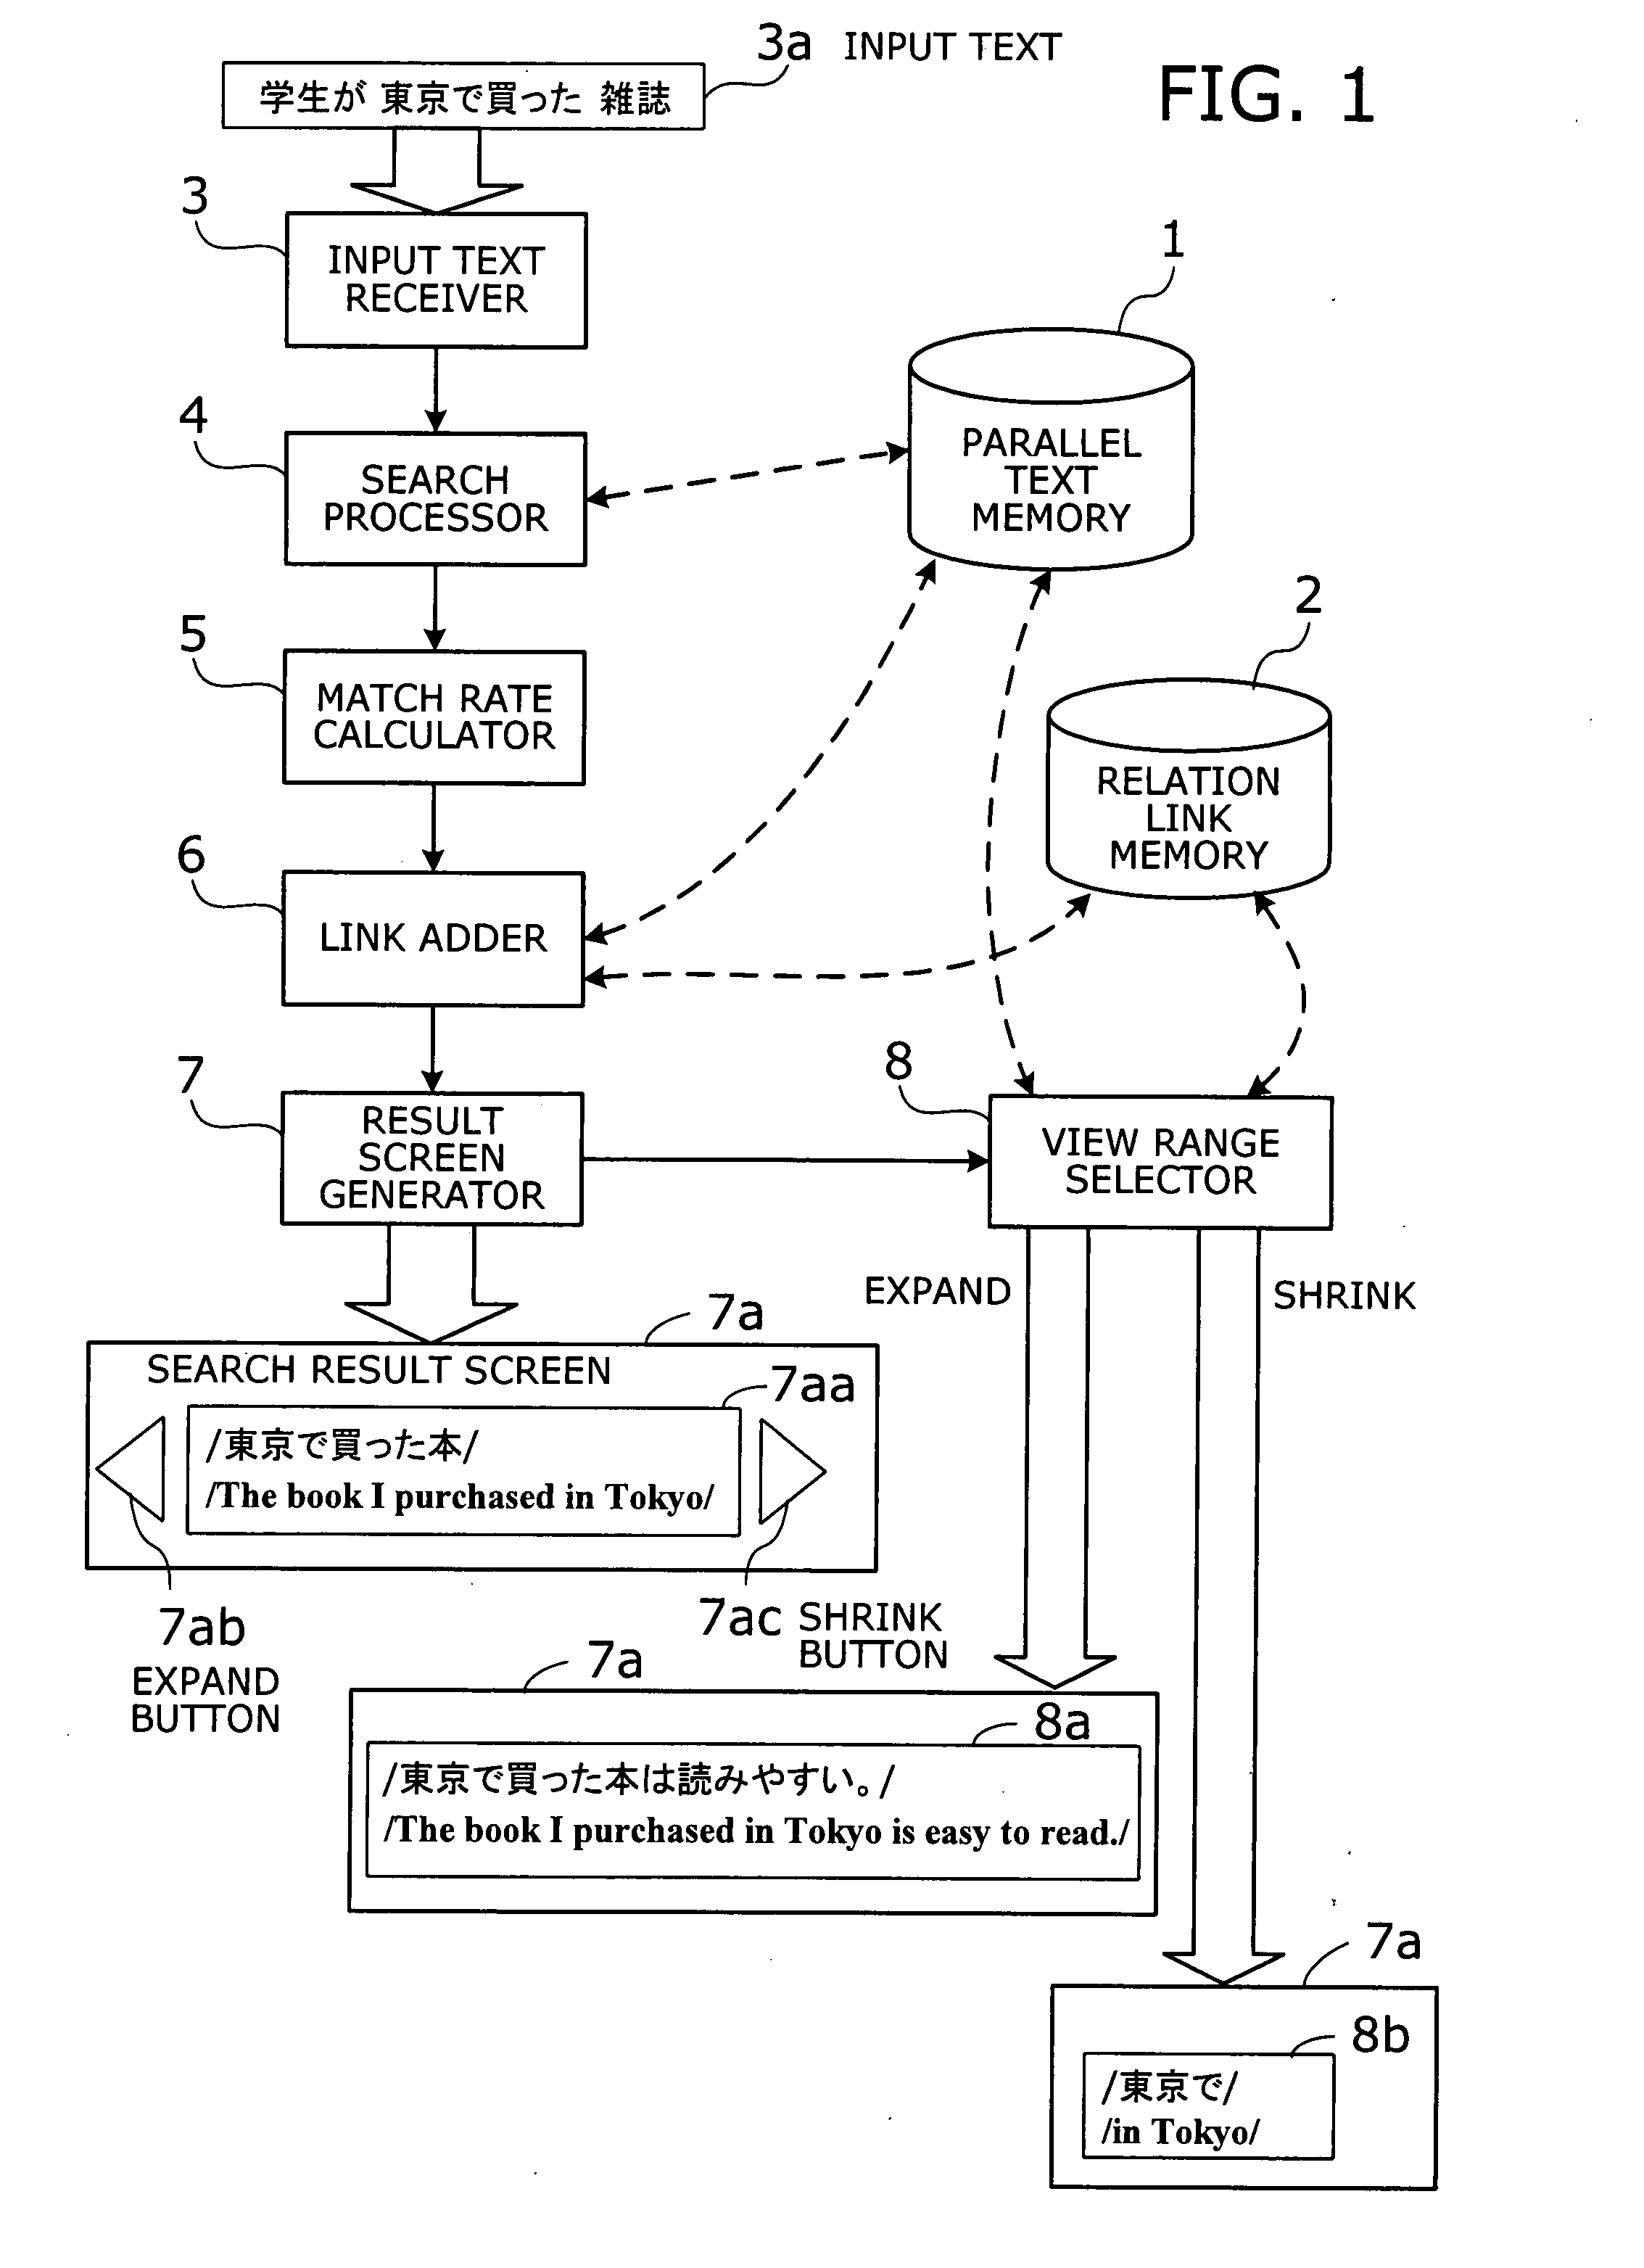 Computer program, apparatus, and method for searching translation memory and displaying search result